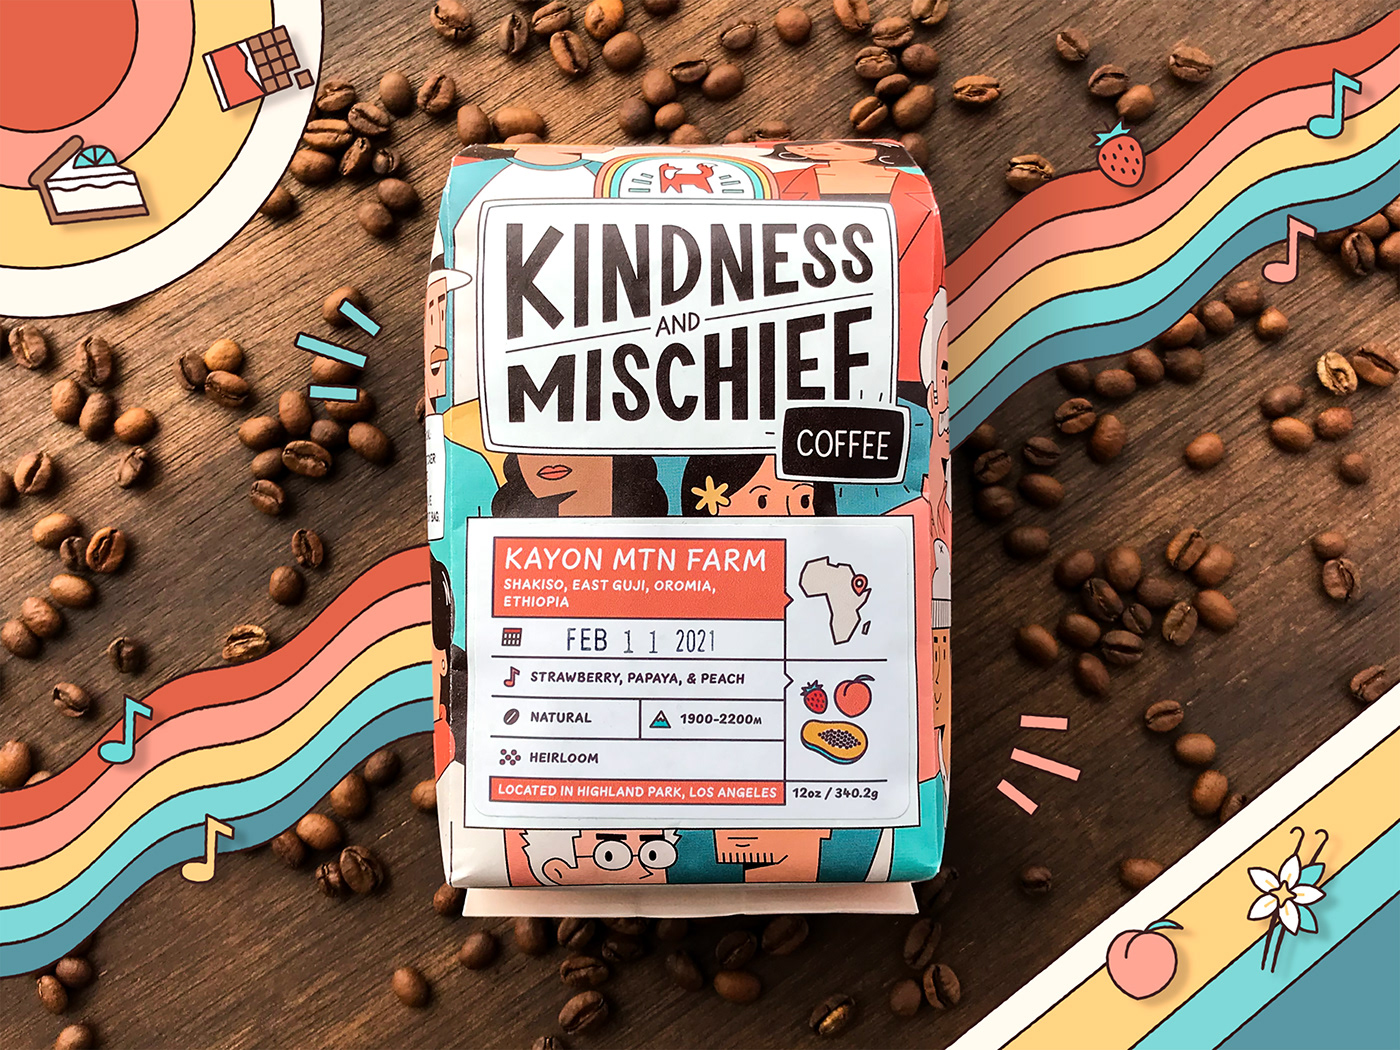 Photograph of a coffee bag that was designed for Kindness and Mischief Coffee in Los Angeles